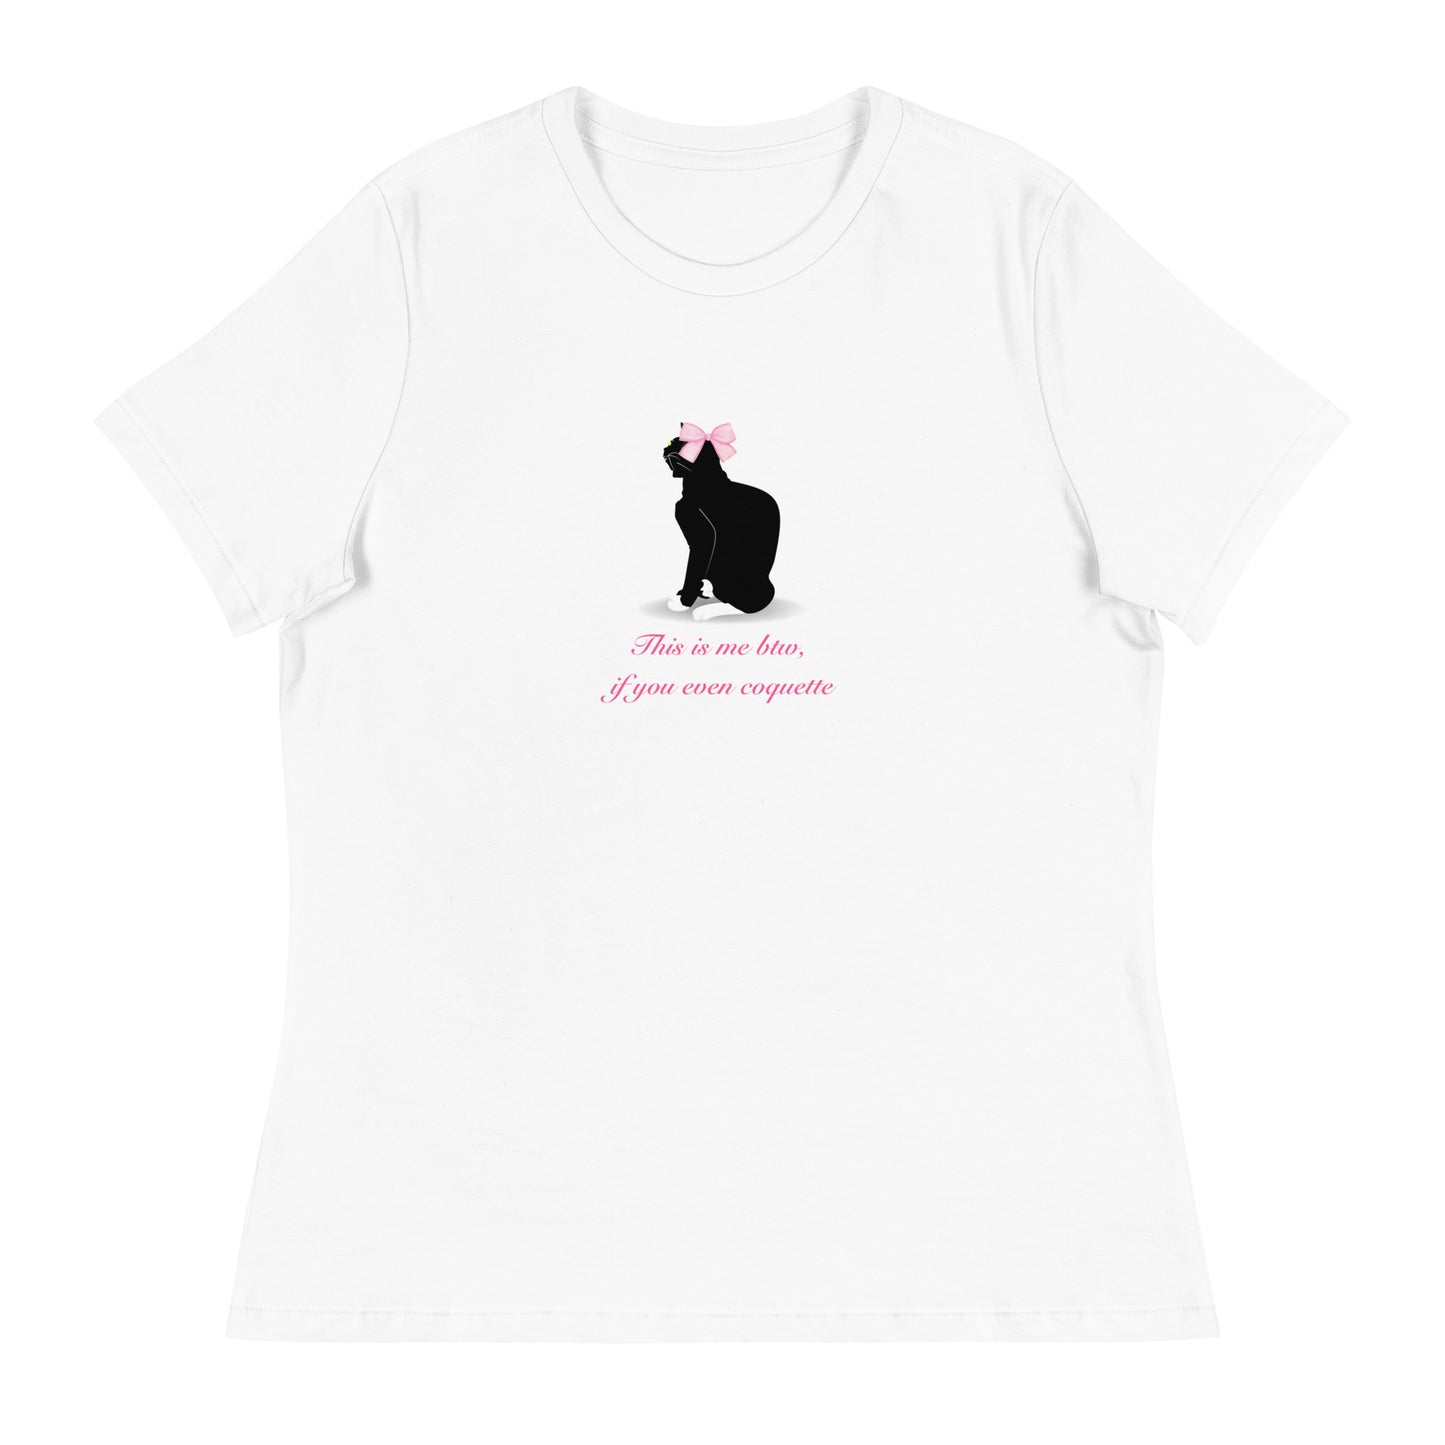 Coquette Shirt, This Is Me Btw, If You Even Care/Coquette Meme, Pink Bow Black Cat, Coquette Aesthetic